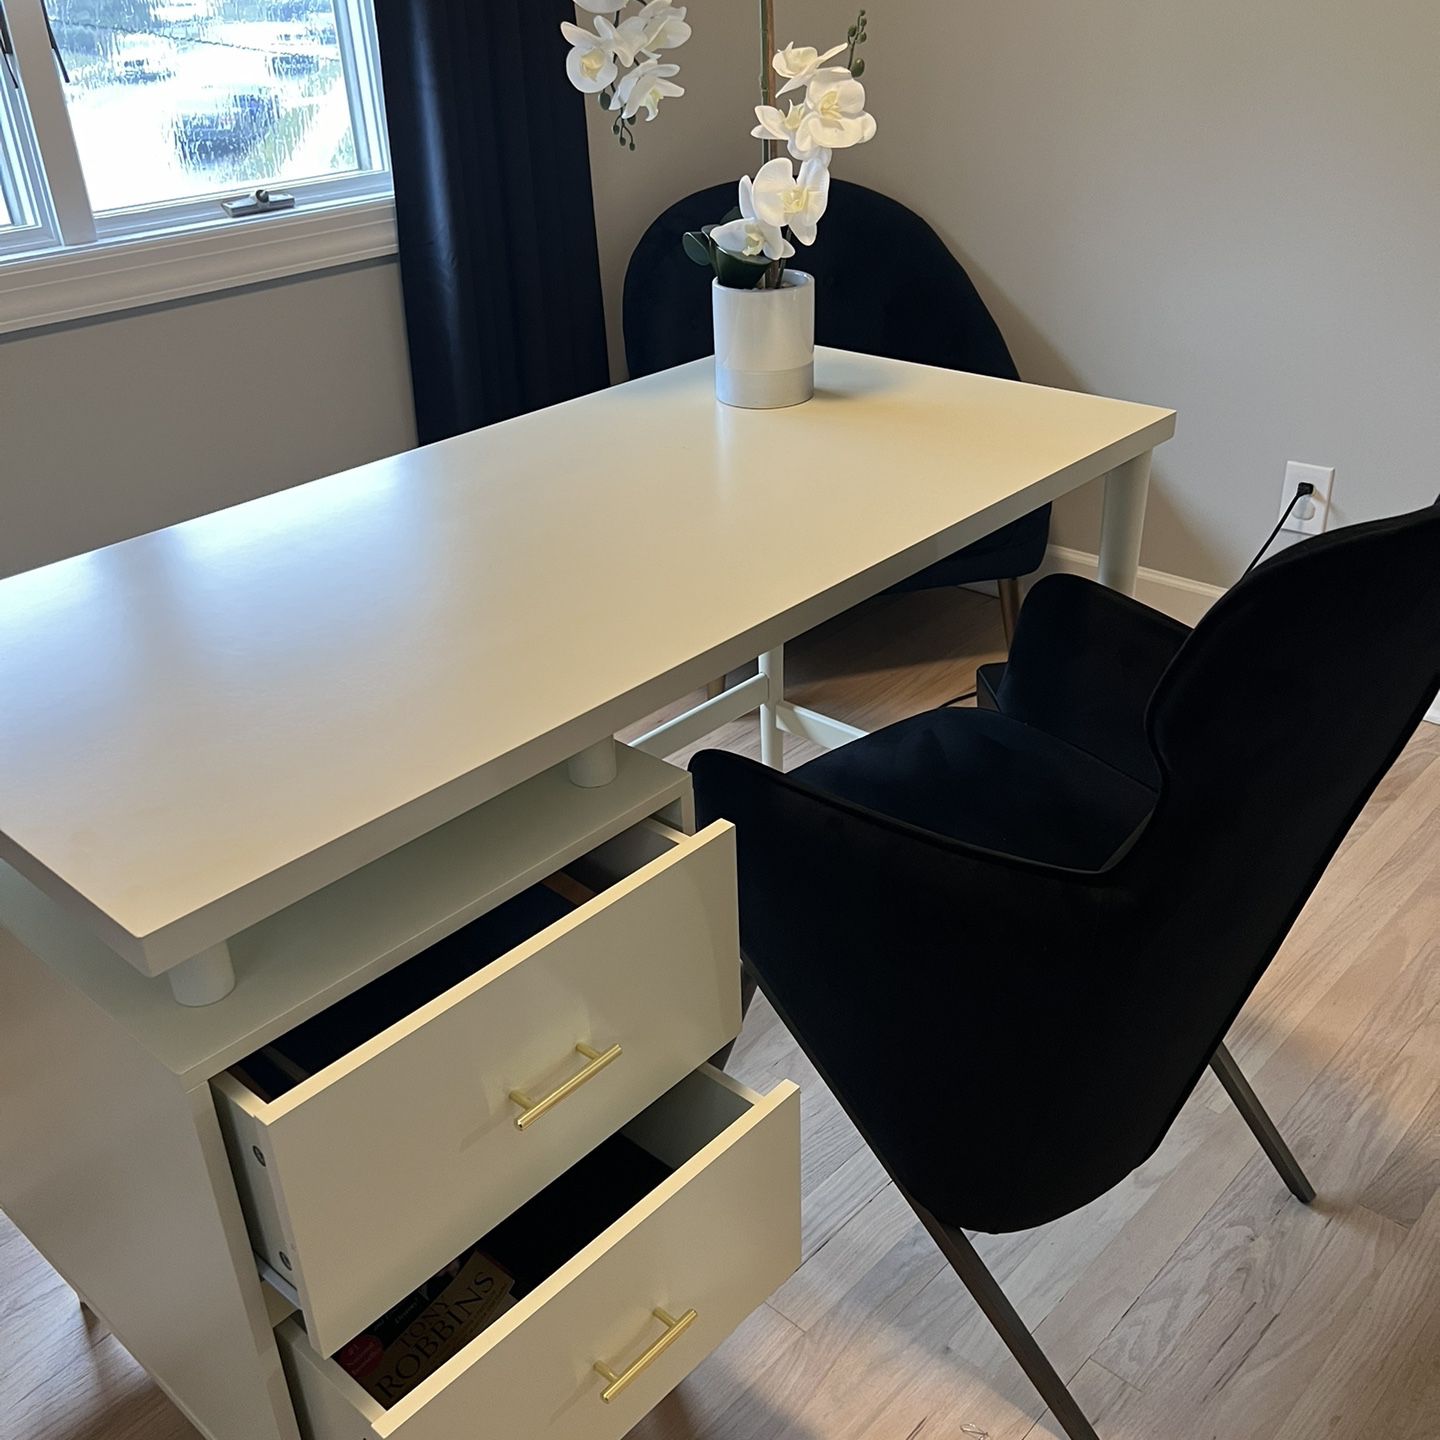 NEW DESK FOR SALE - MOVING